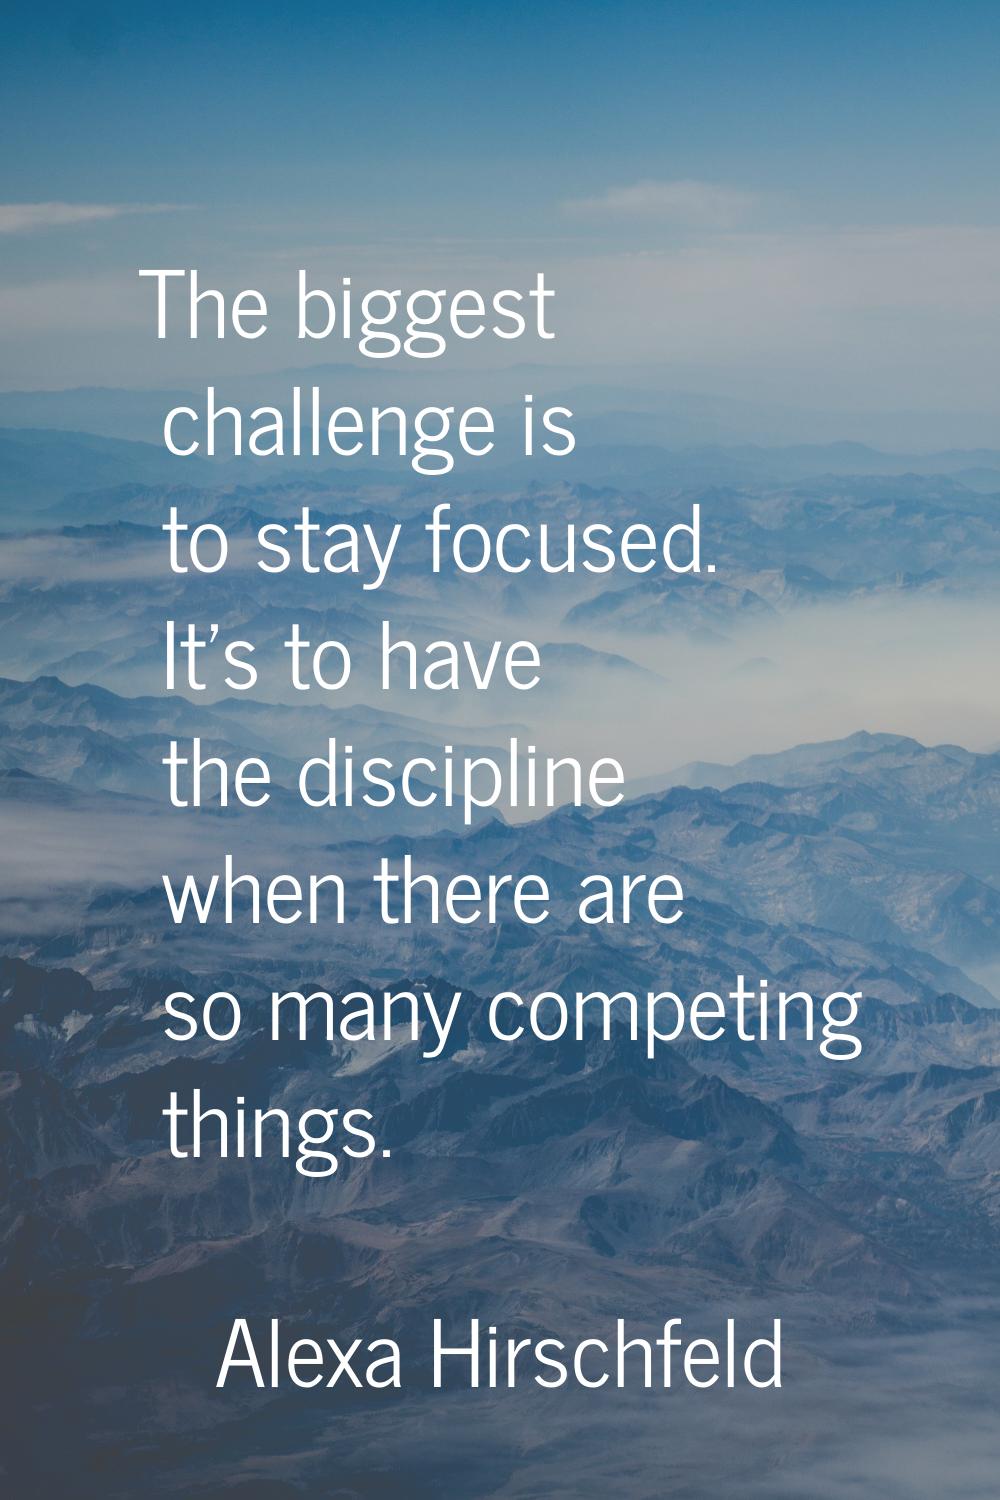 The biggest challenge is to stay focused. It's to have the discipline when there are so many compet